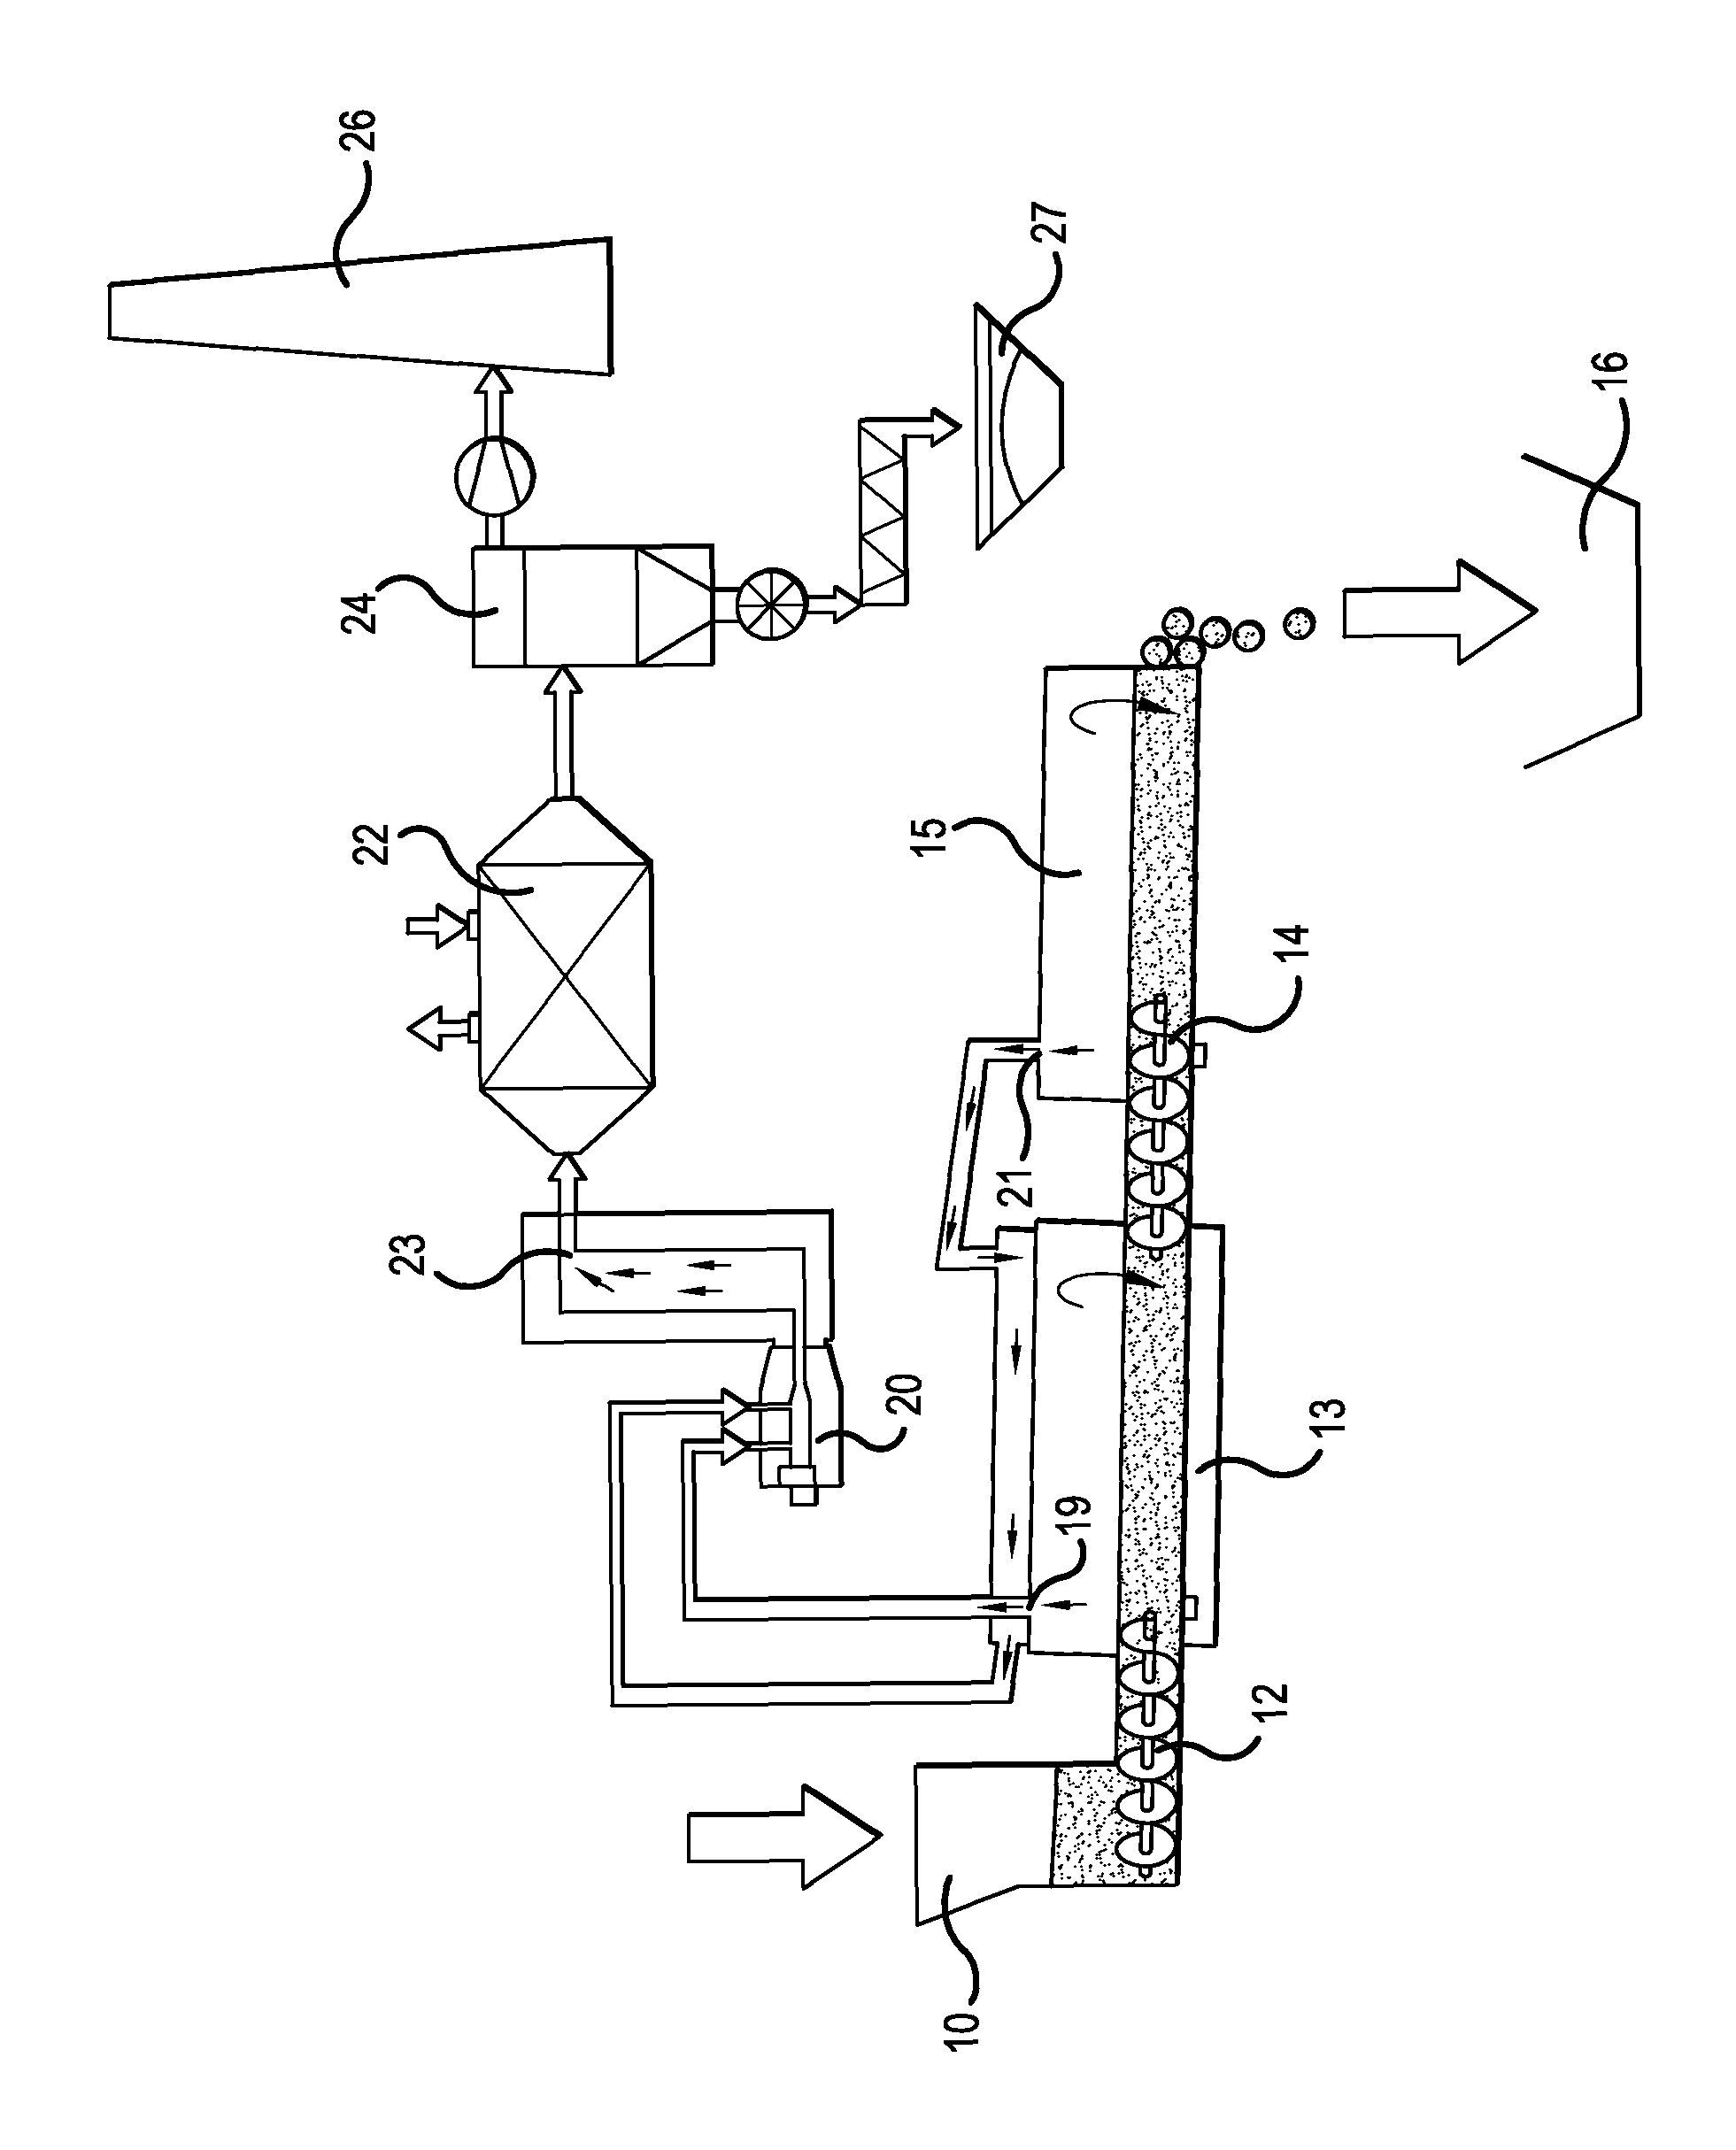 Method for producing phosphates and phosphate-containing compounds, particularly alkaline earth phosphates, alkaline earth silicophosphates, or alkaline earth oxides